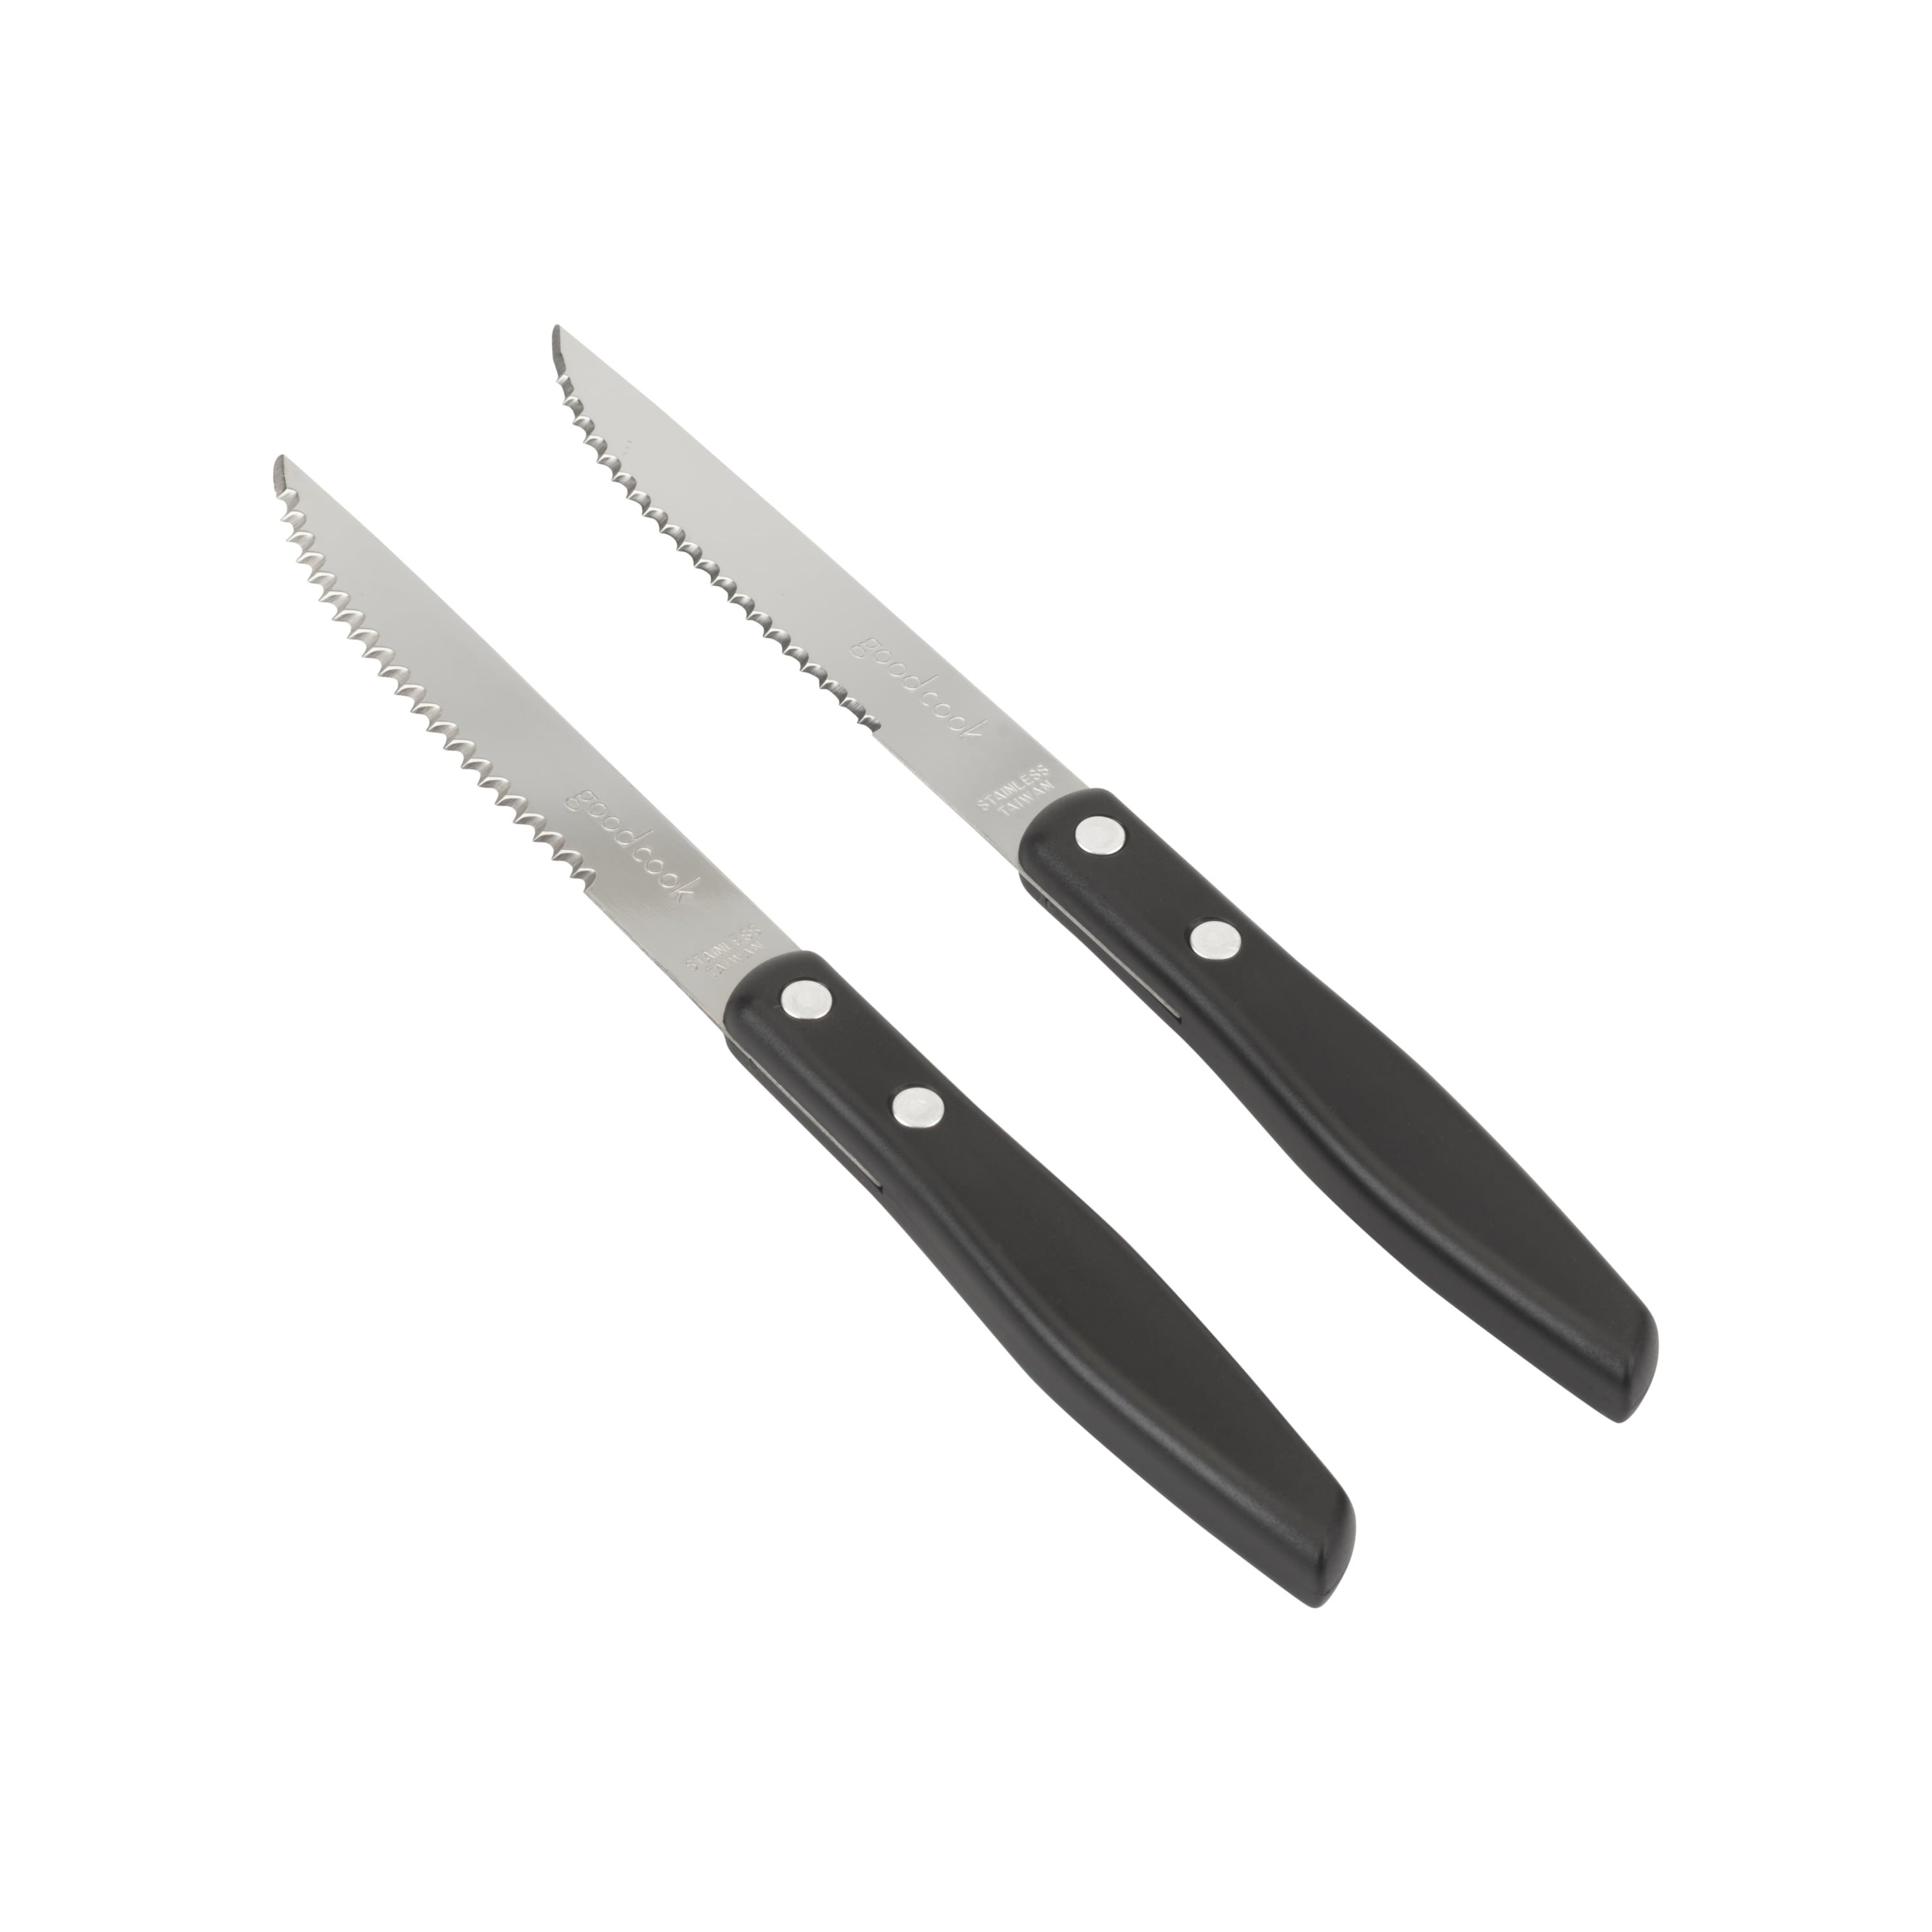 KitchenCraft MasterClass Steak Knives Set, Two Stainless Steel Knives for  Steak, Serrated Edges for Effortless Cutting, Stain and Corrosion  Resistant